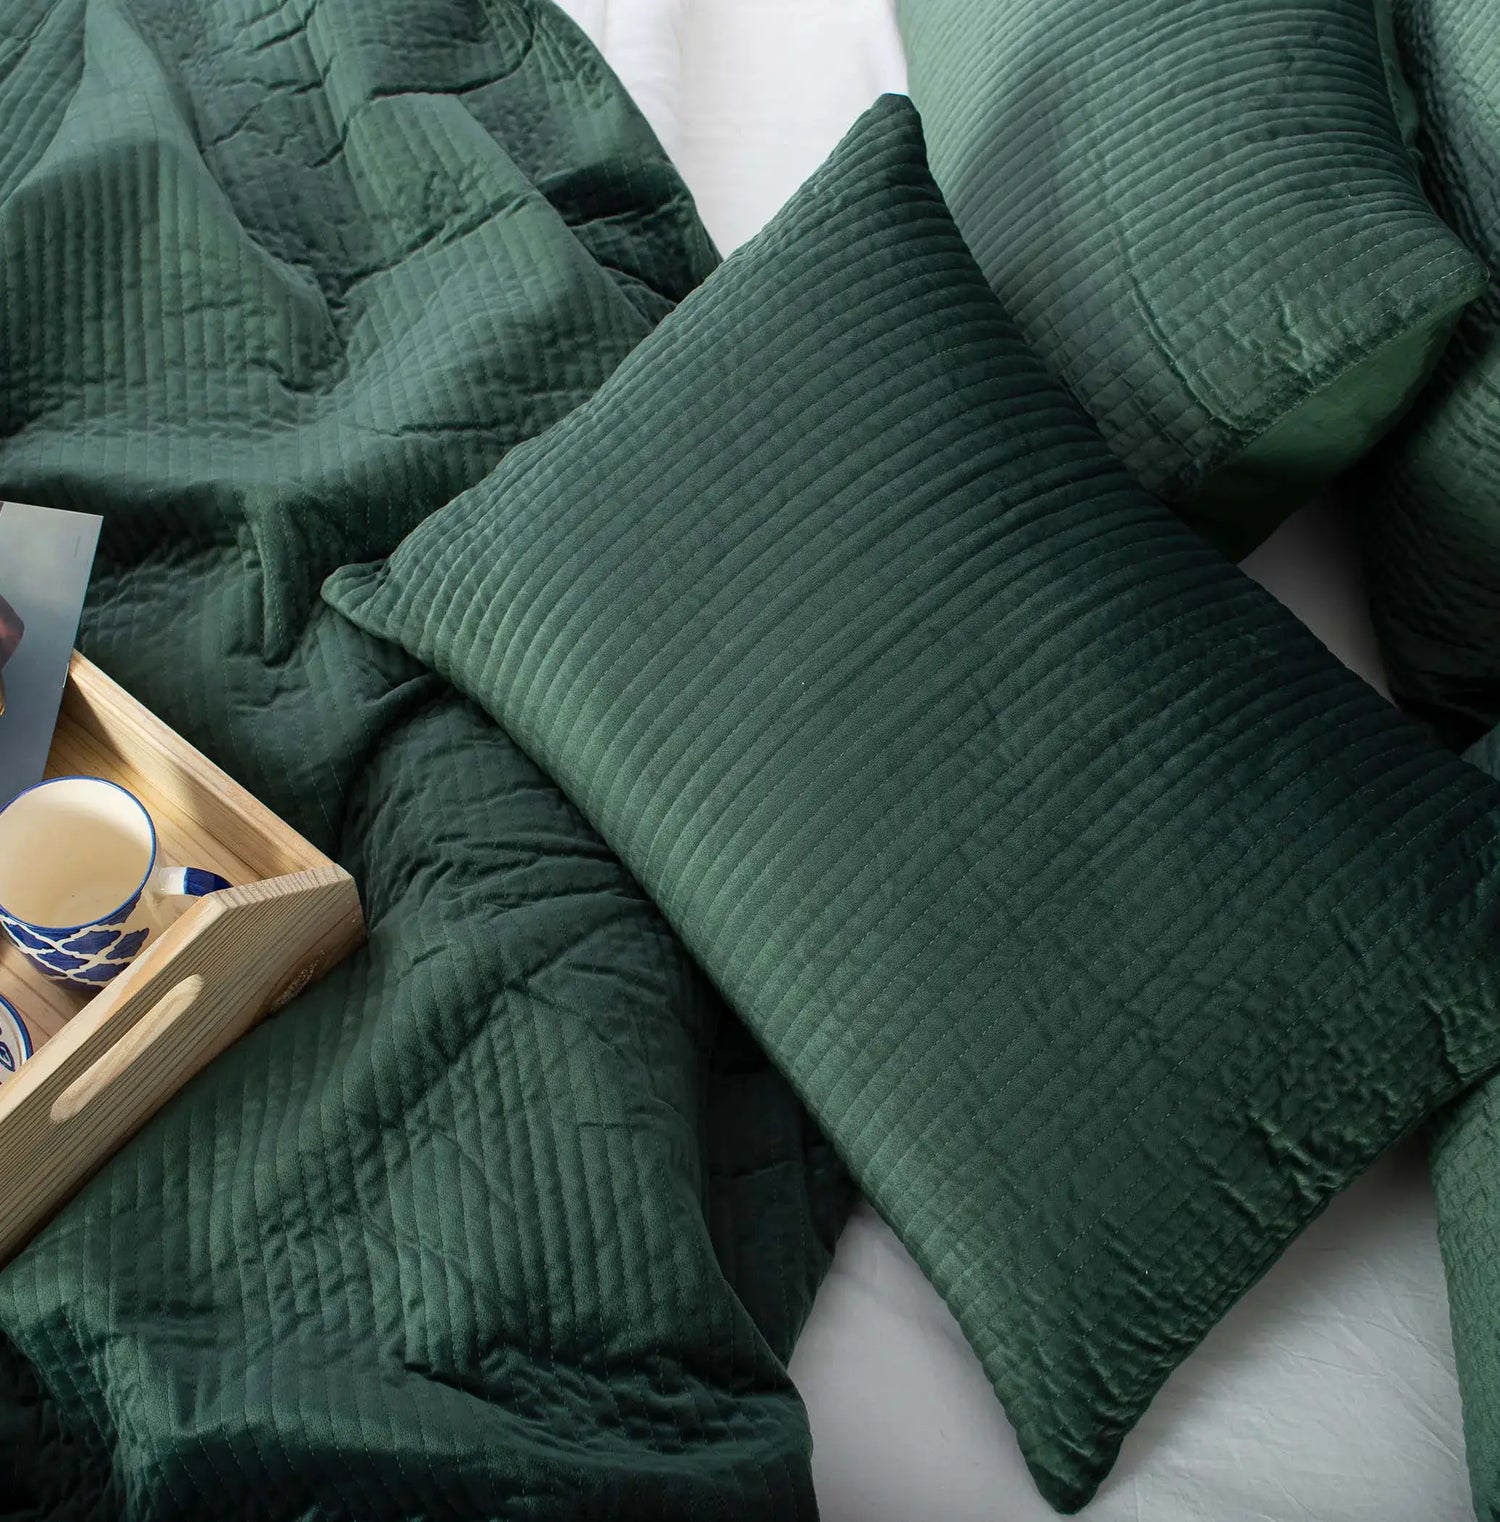 With our velvet luxury bedding, where dreams are adorned in lavishness, you may wrap yourself in cozy comfort.